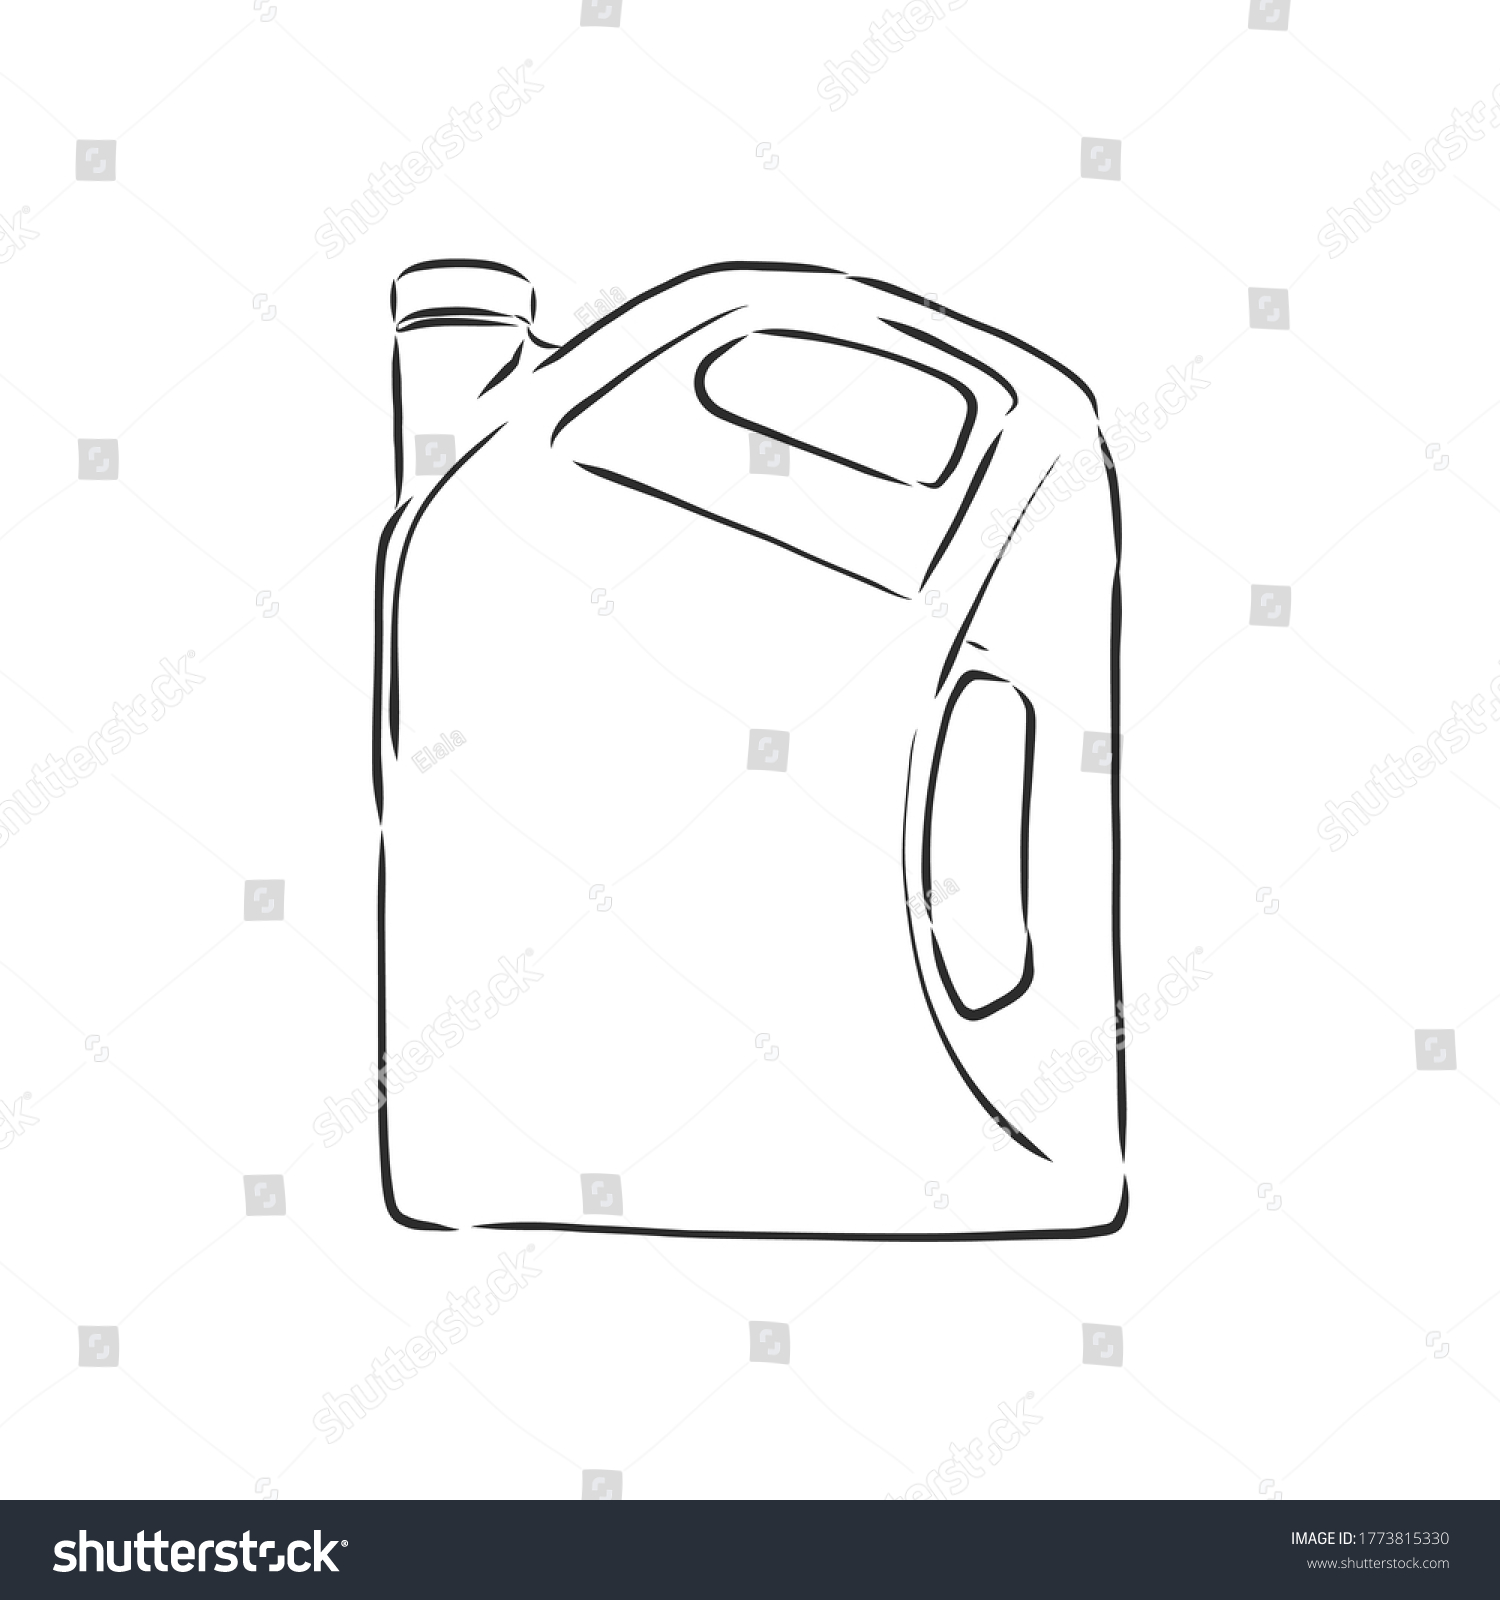 1,497 Oil tanks sketches Images, Stock Photos & Vectors | Shutterstock